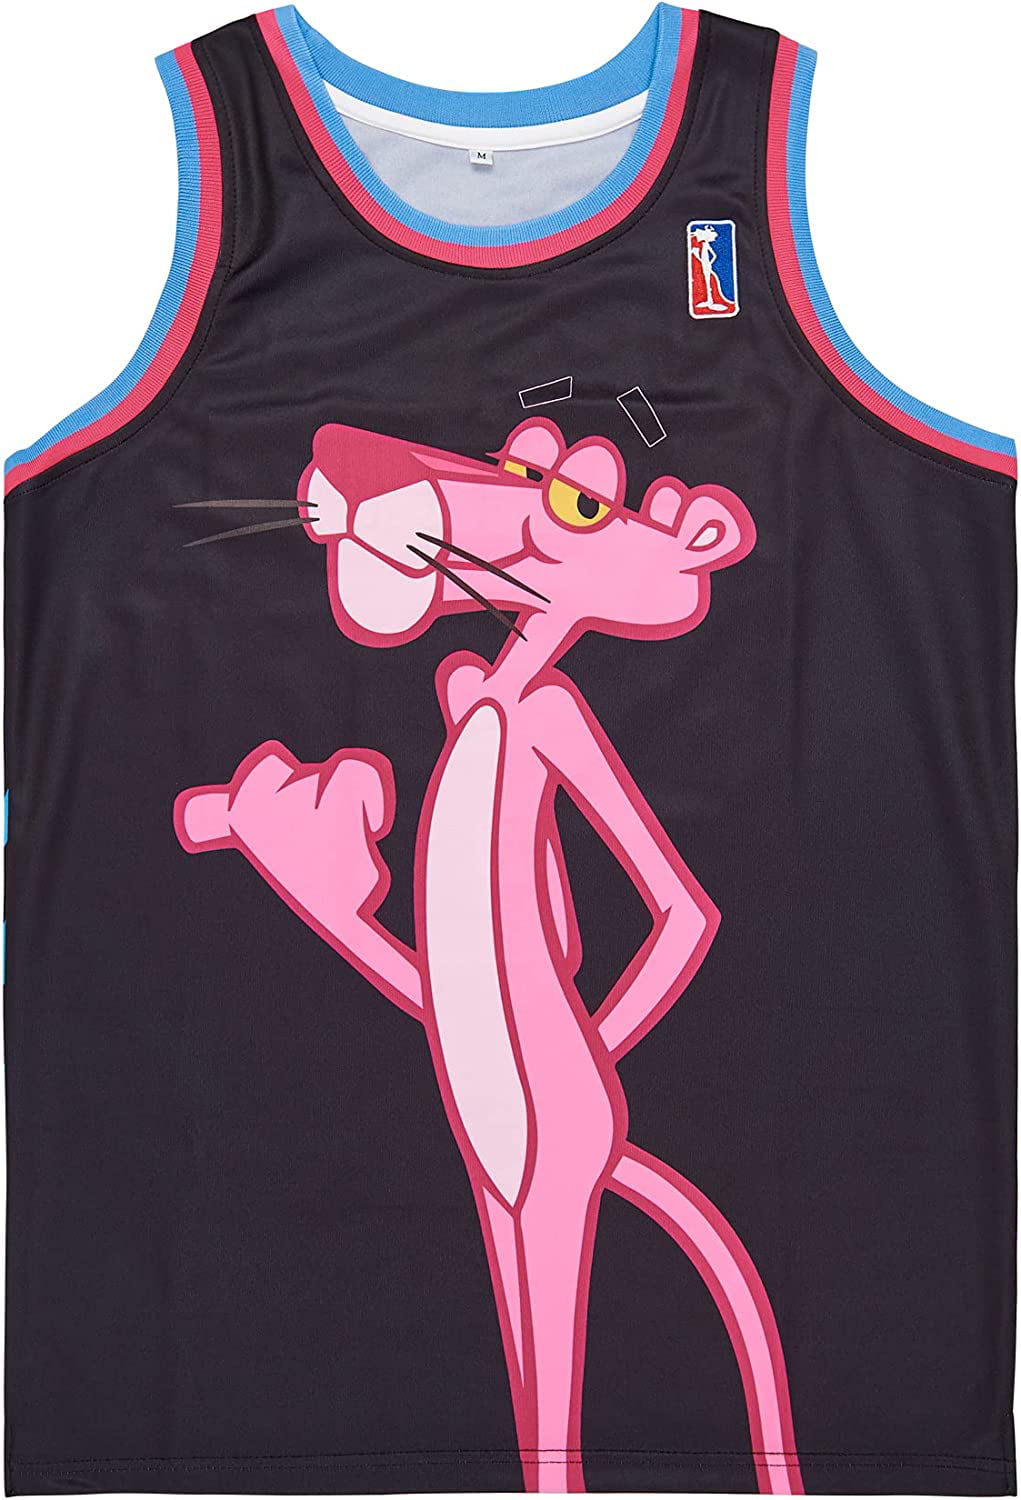 Pink Panther #3 Miami Basketball Jersey Youth Large Stitched Pink